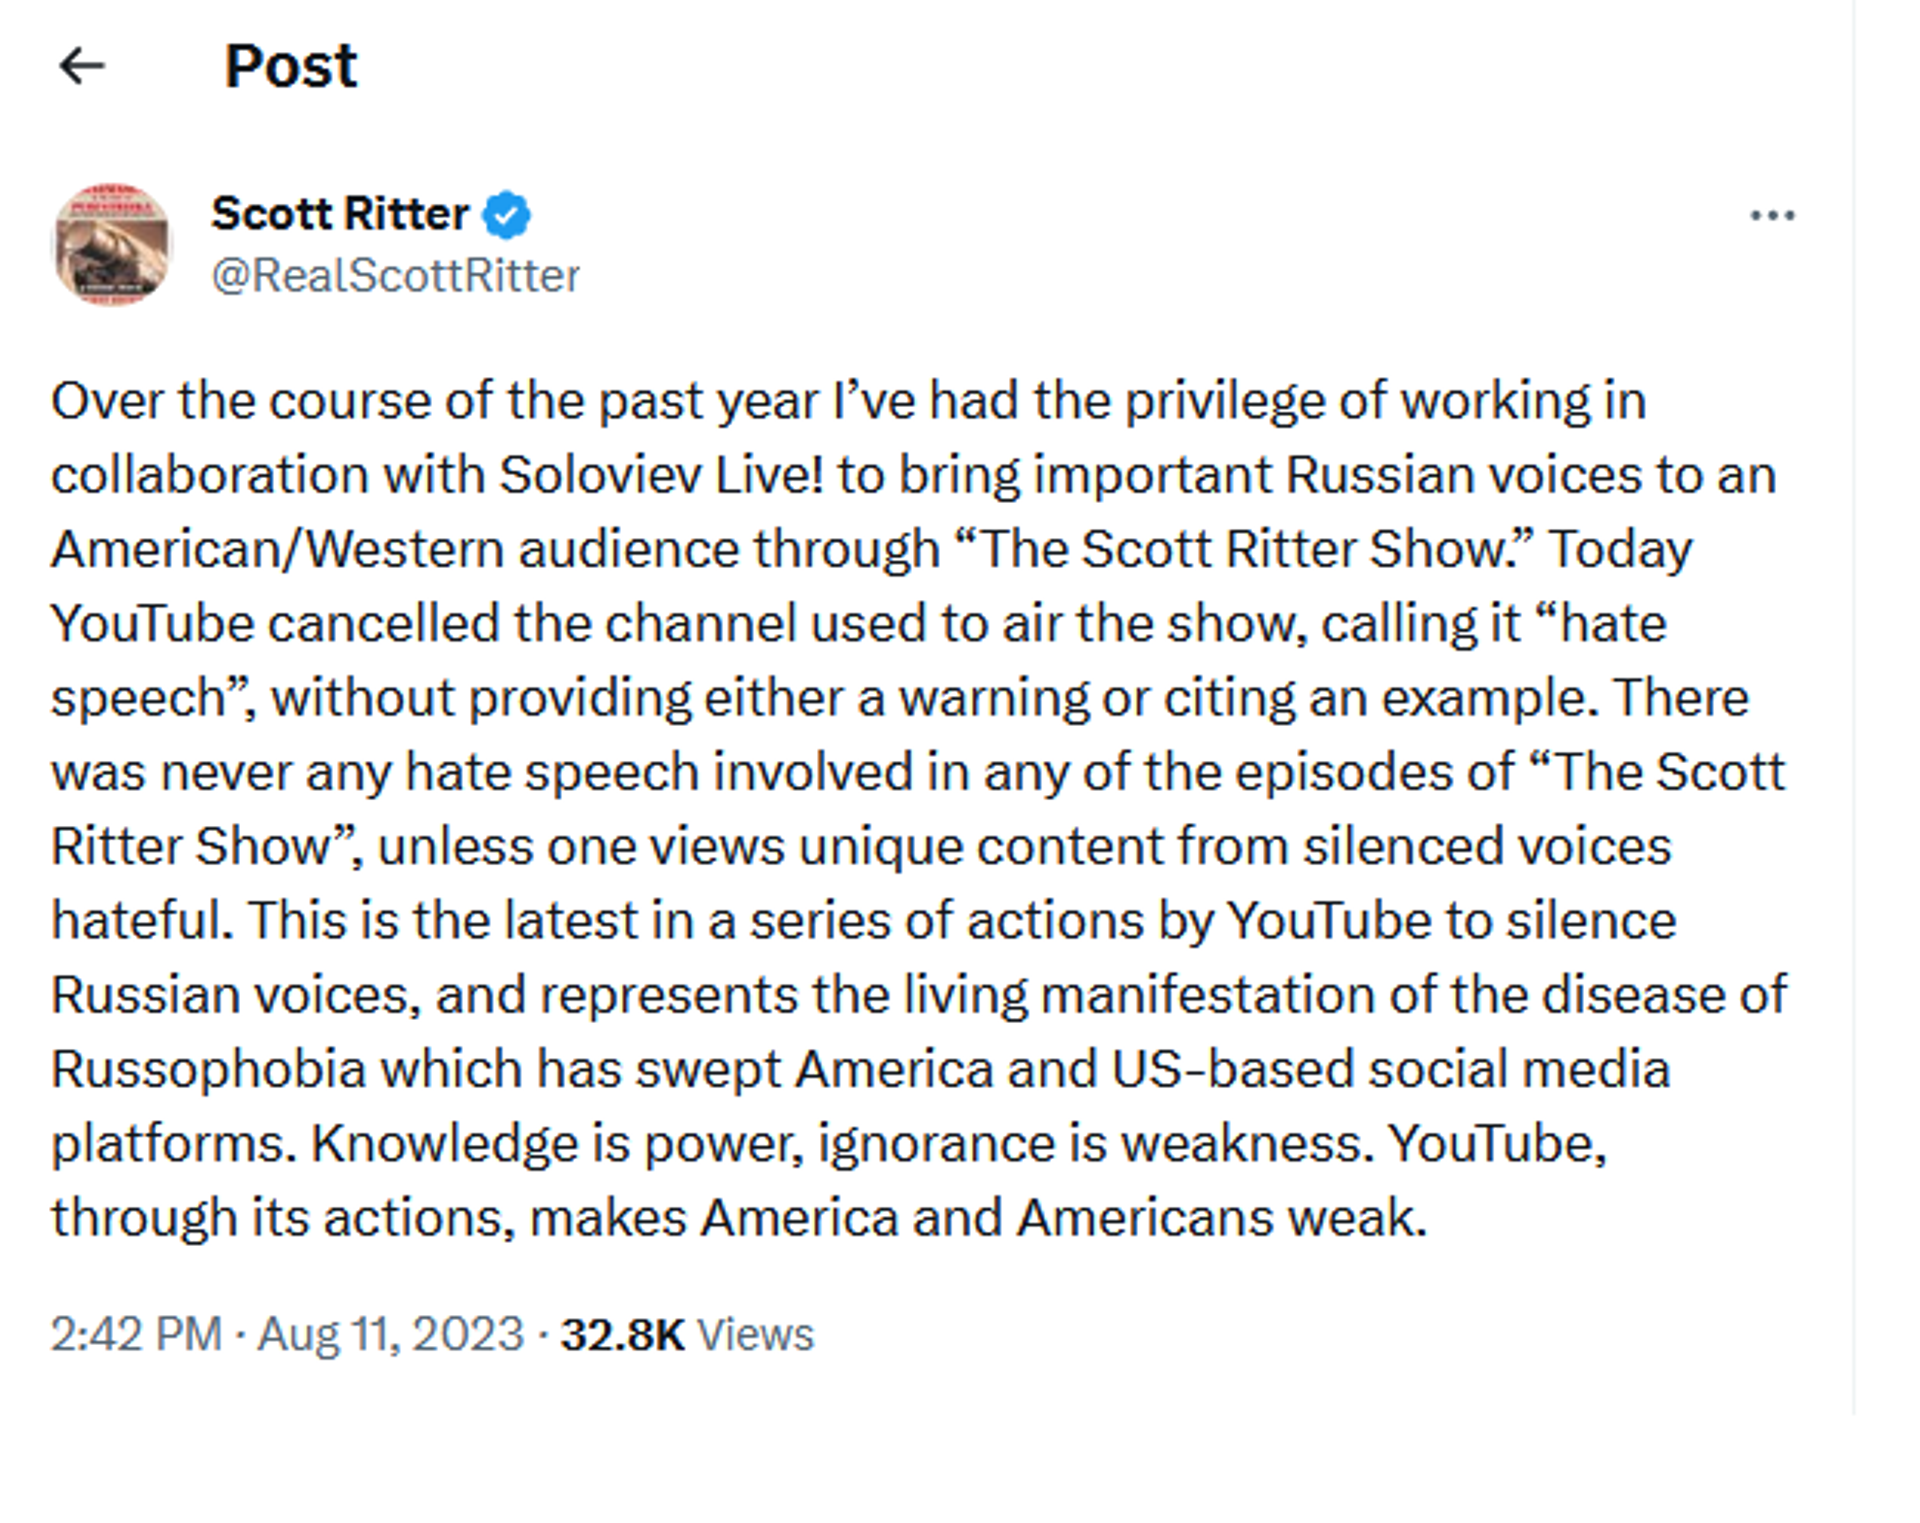 Screenshot of Scott Ritter's reaction to the deletion of his YouTube channel. - Sputnik International, 1920, 11.08.2023